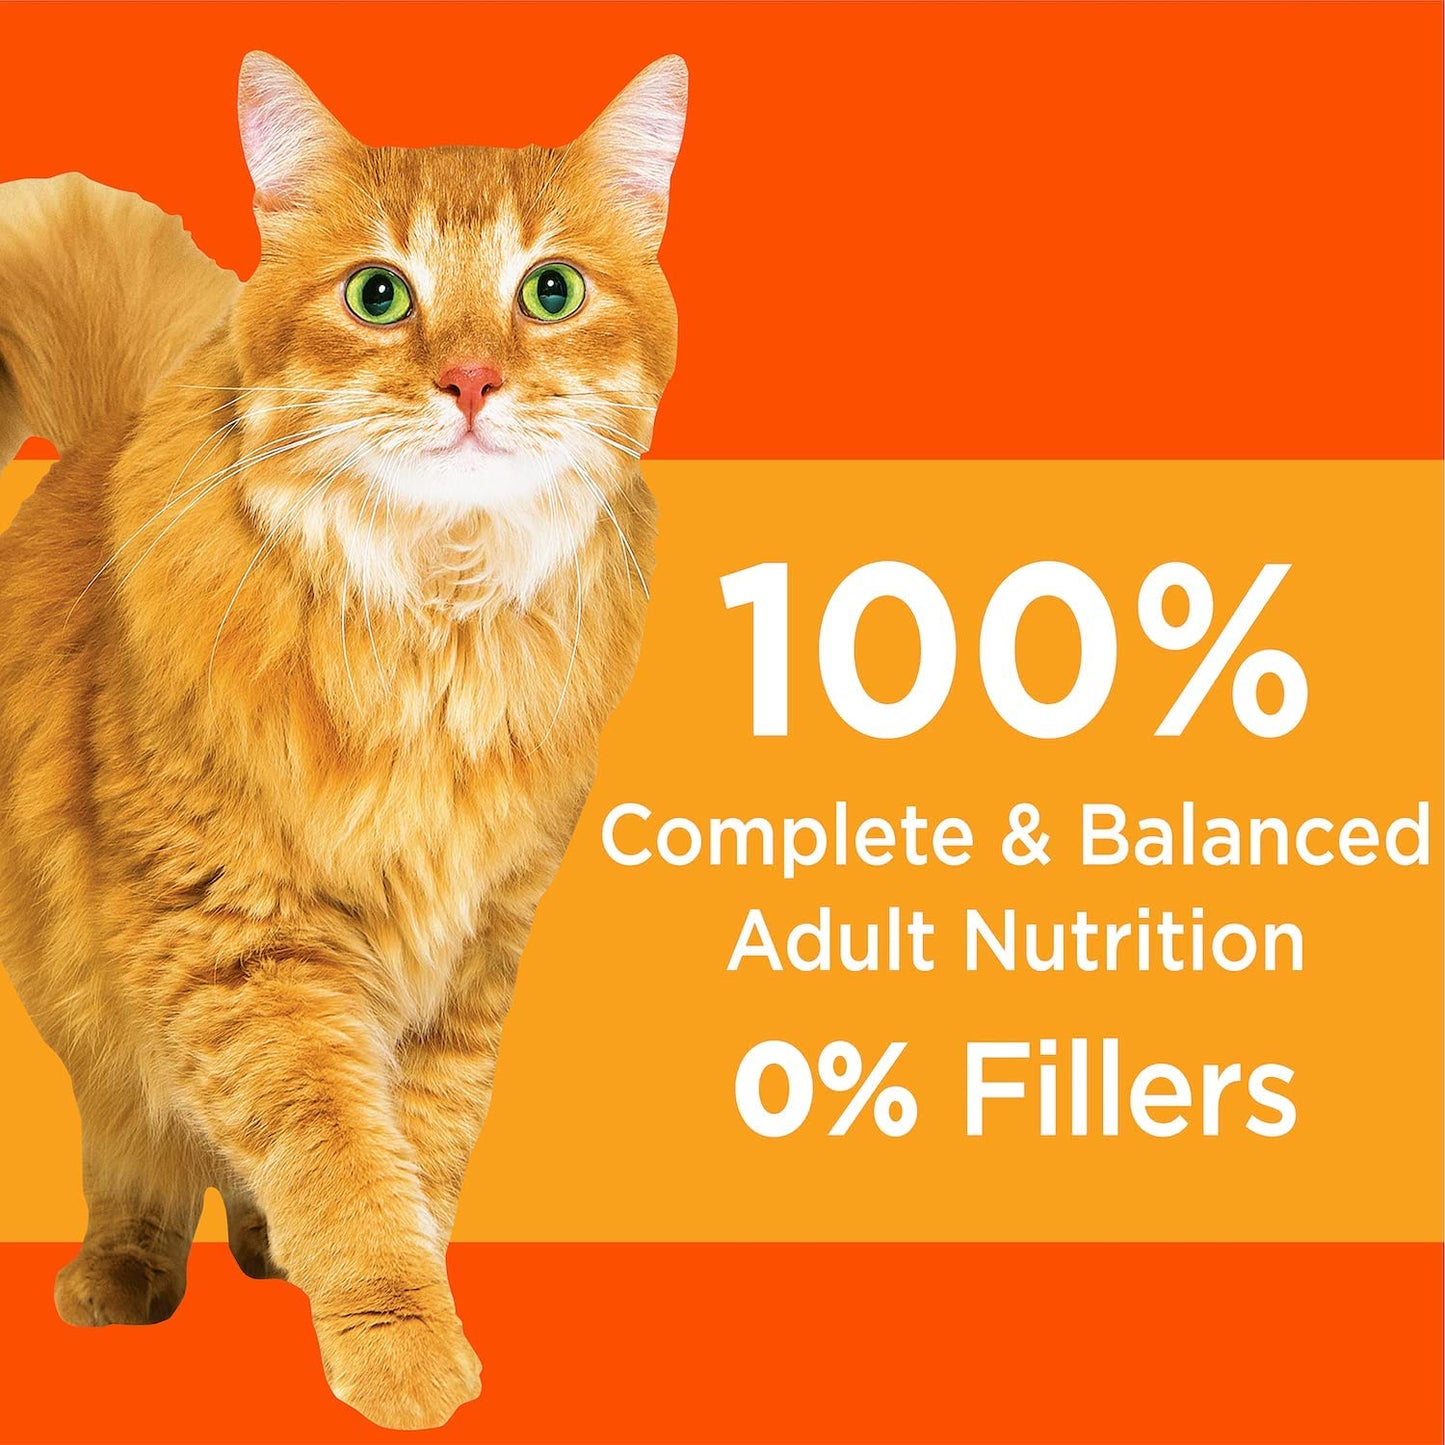 IAMS PROACTIVE HEALTH Adult Healthy Dry Cat Food with Chicken Cat Kibble, 22 Lb. Bag